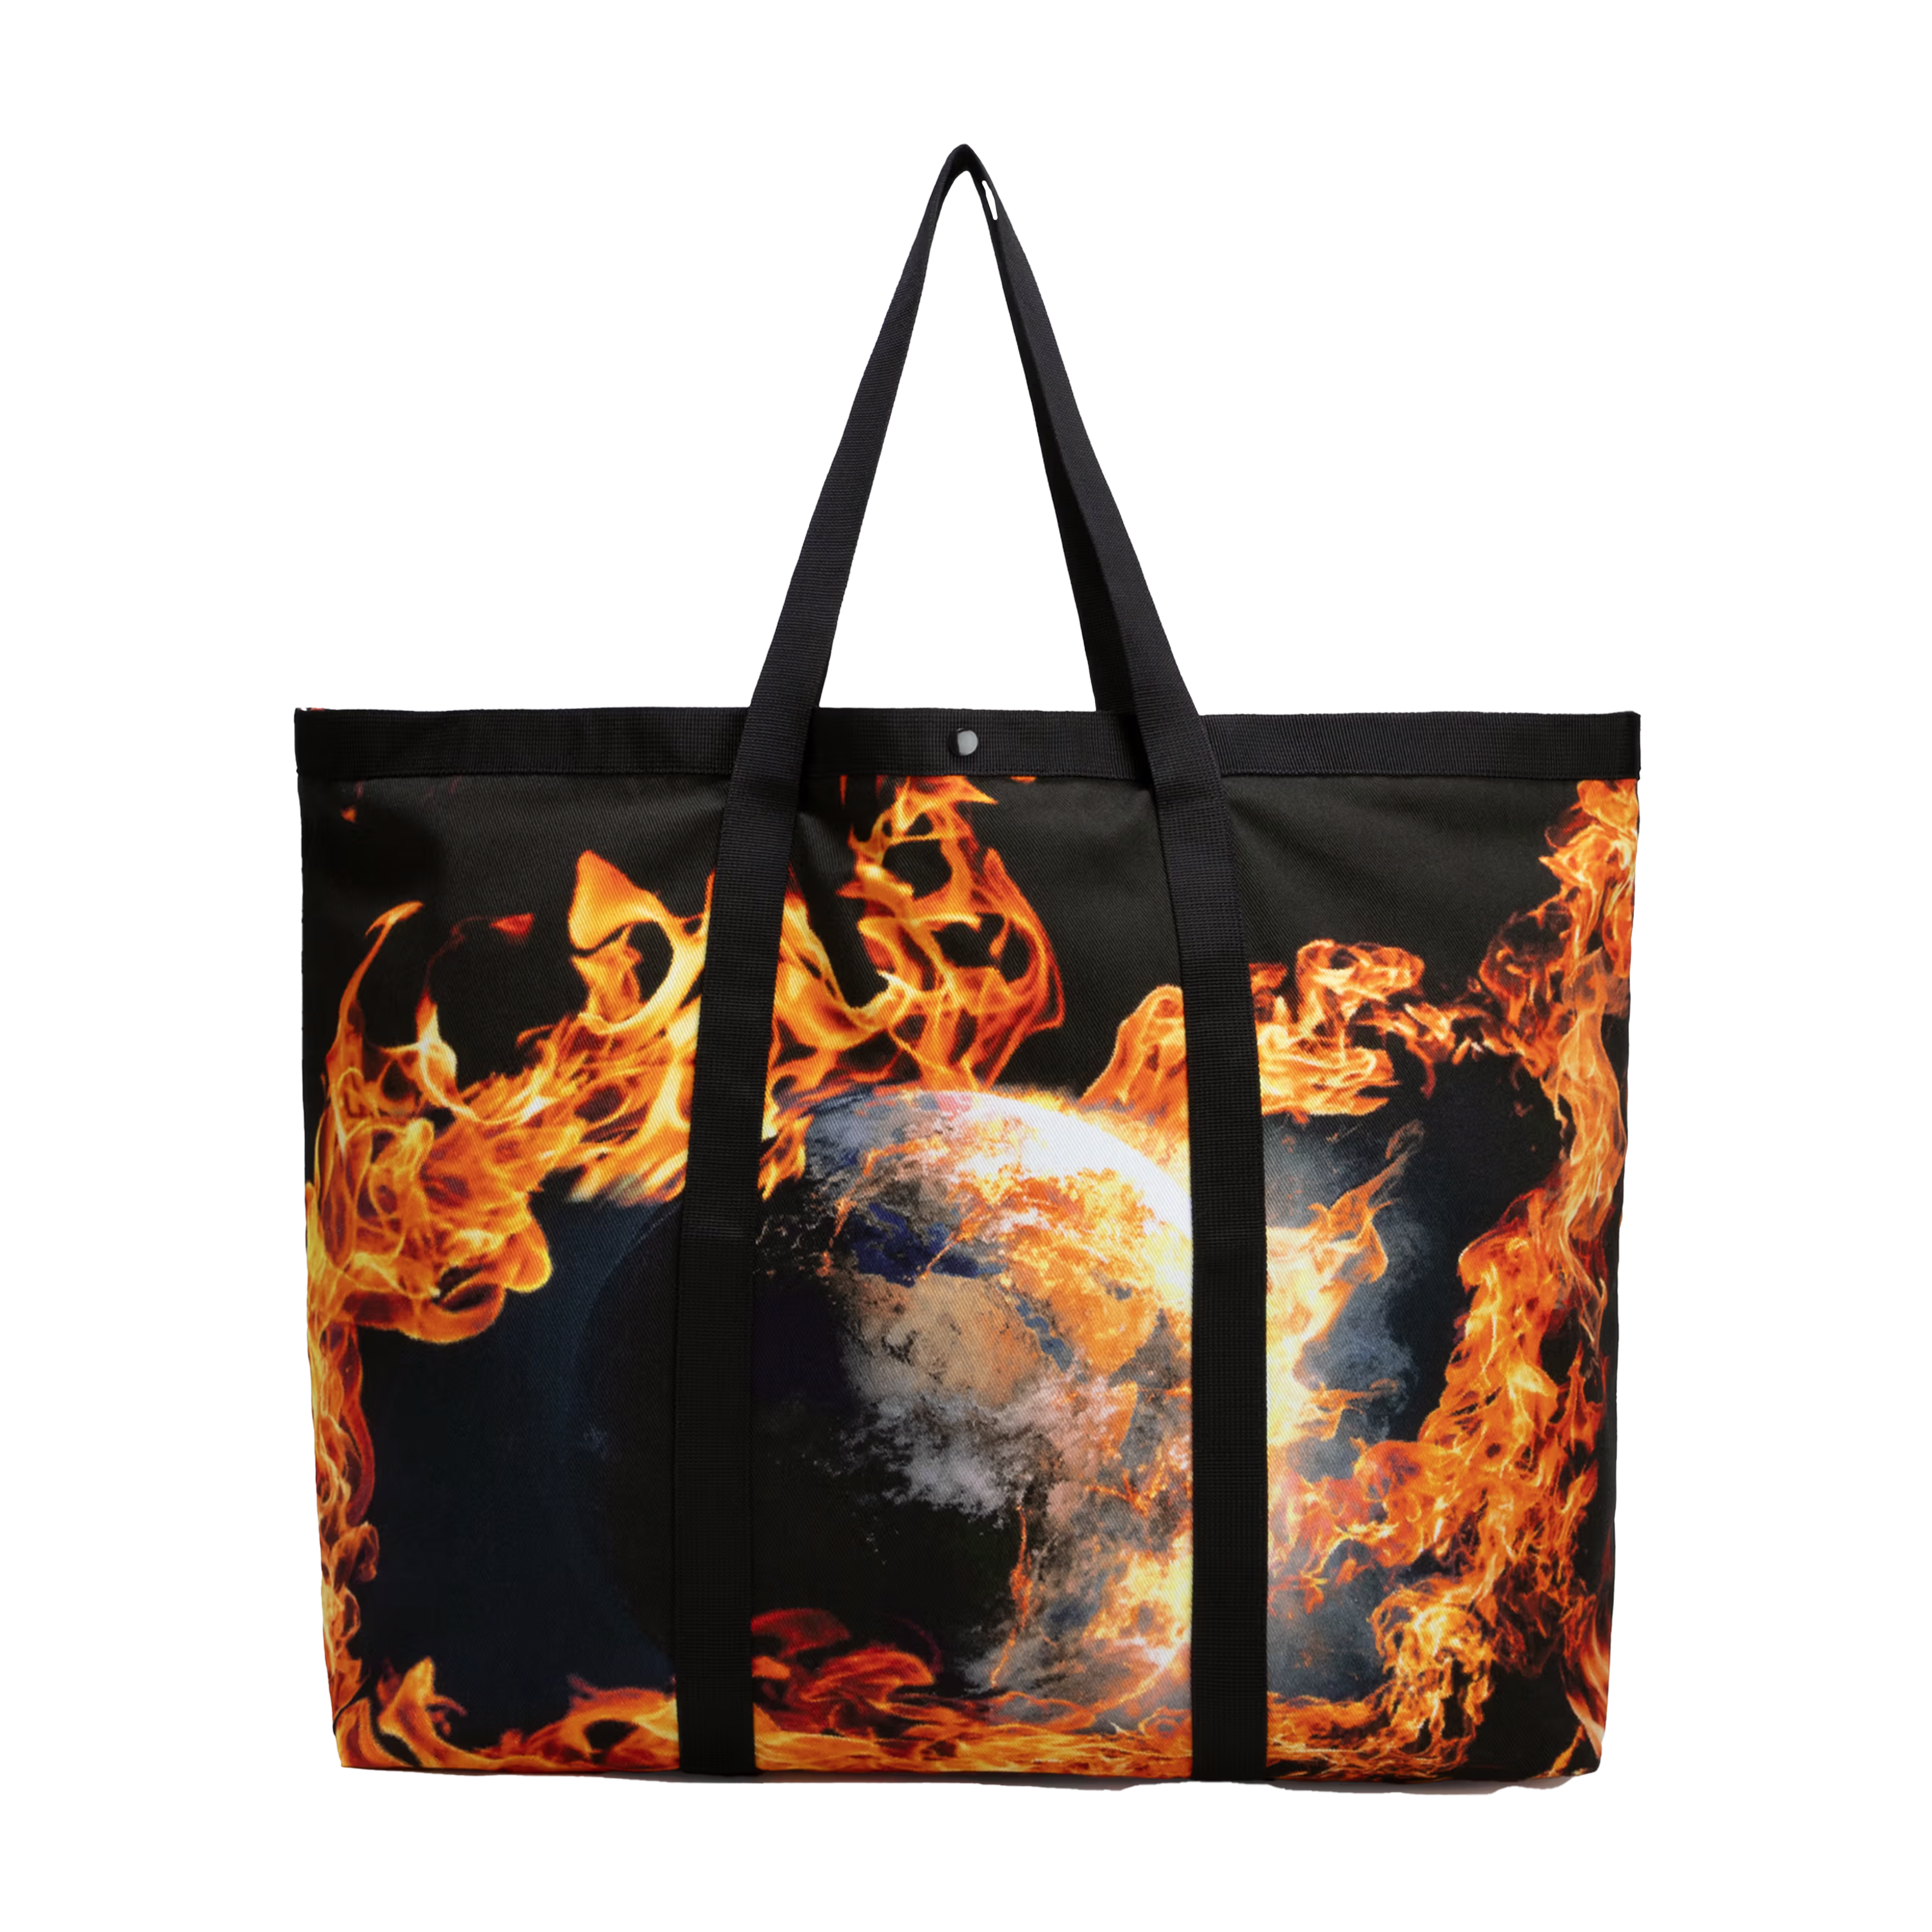 SKY HIGH FARMS WORLD IS BURNING TOTE BAG MULTI-COLOR